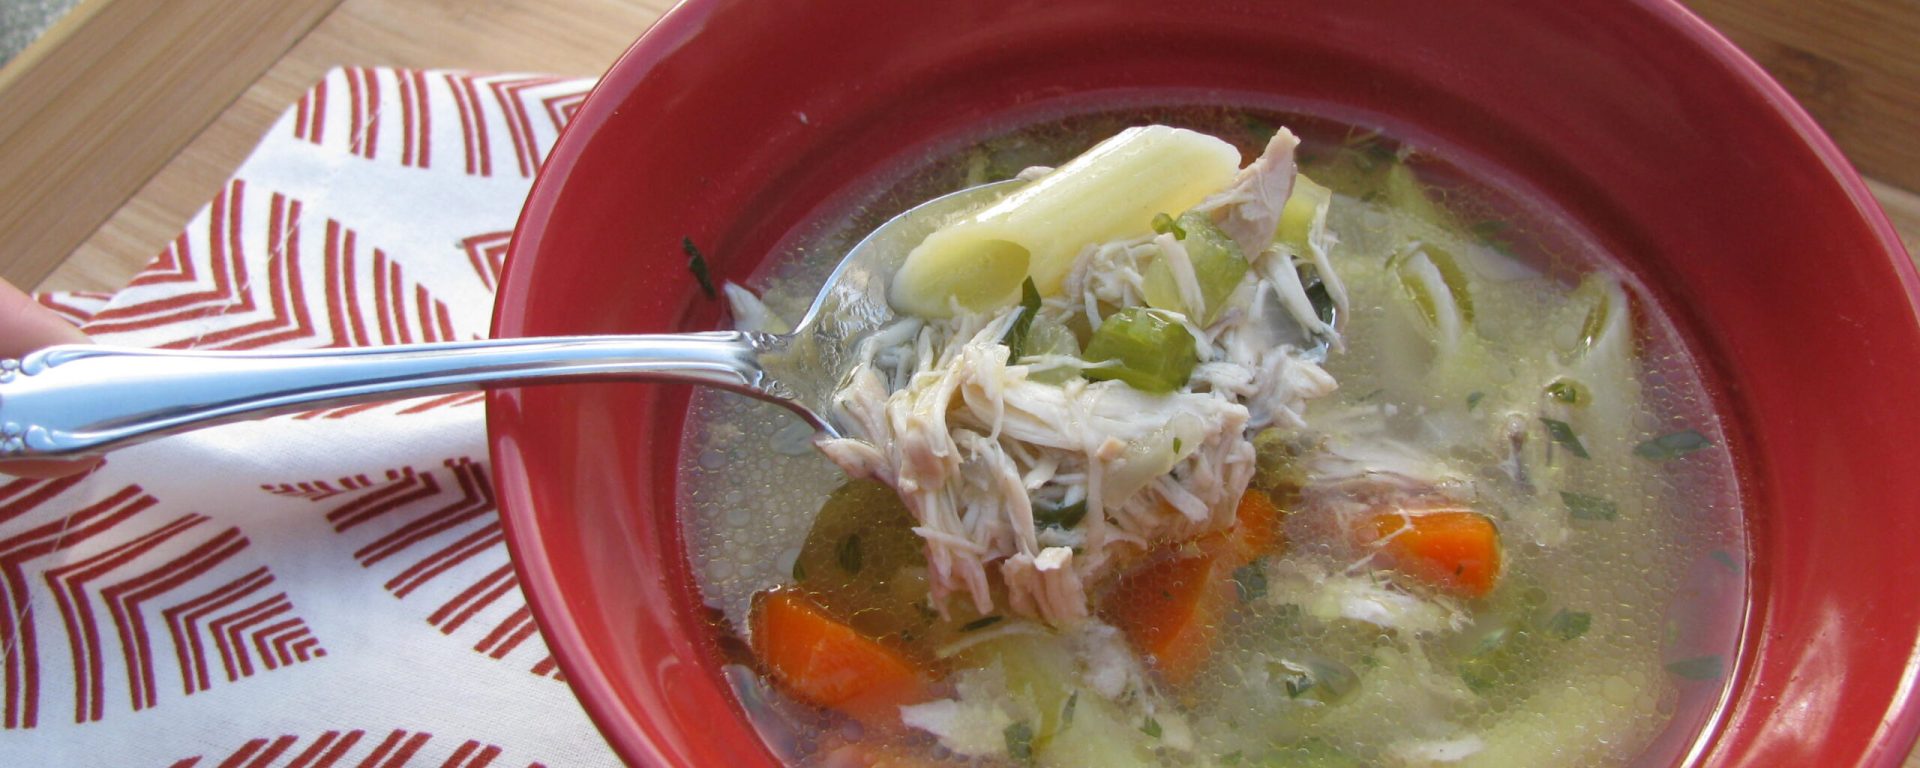 Shredded chicken and vegetables in this bowl of rainy day chicken soup